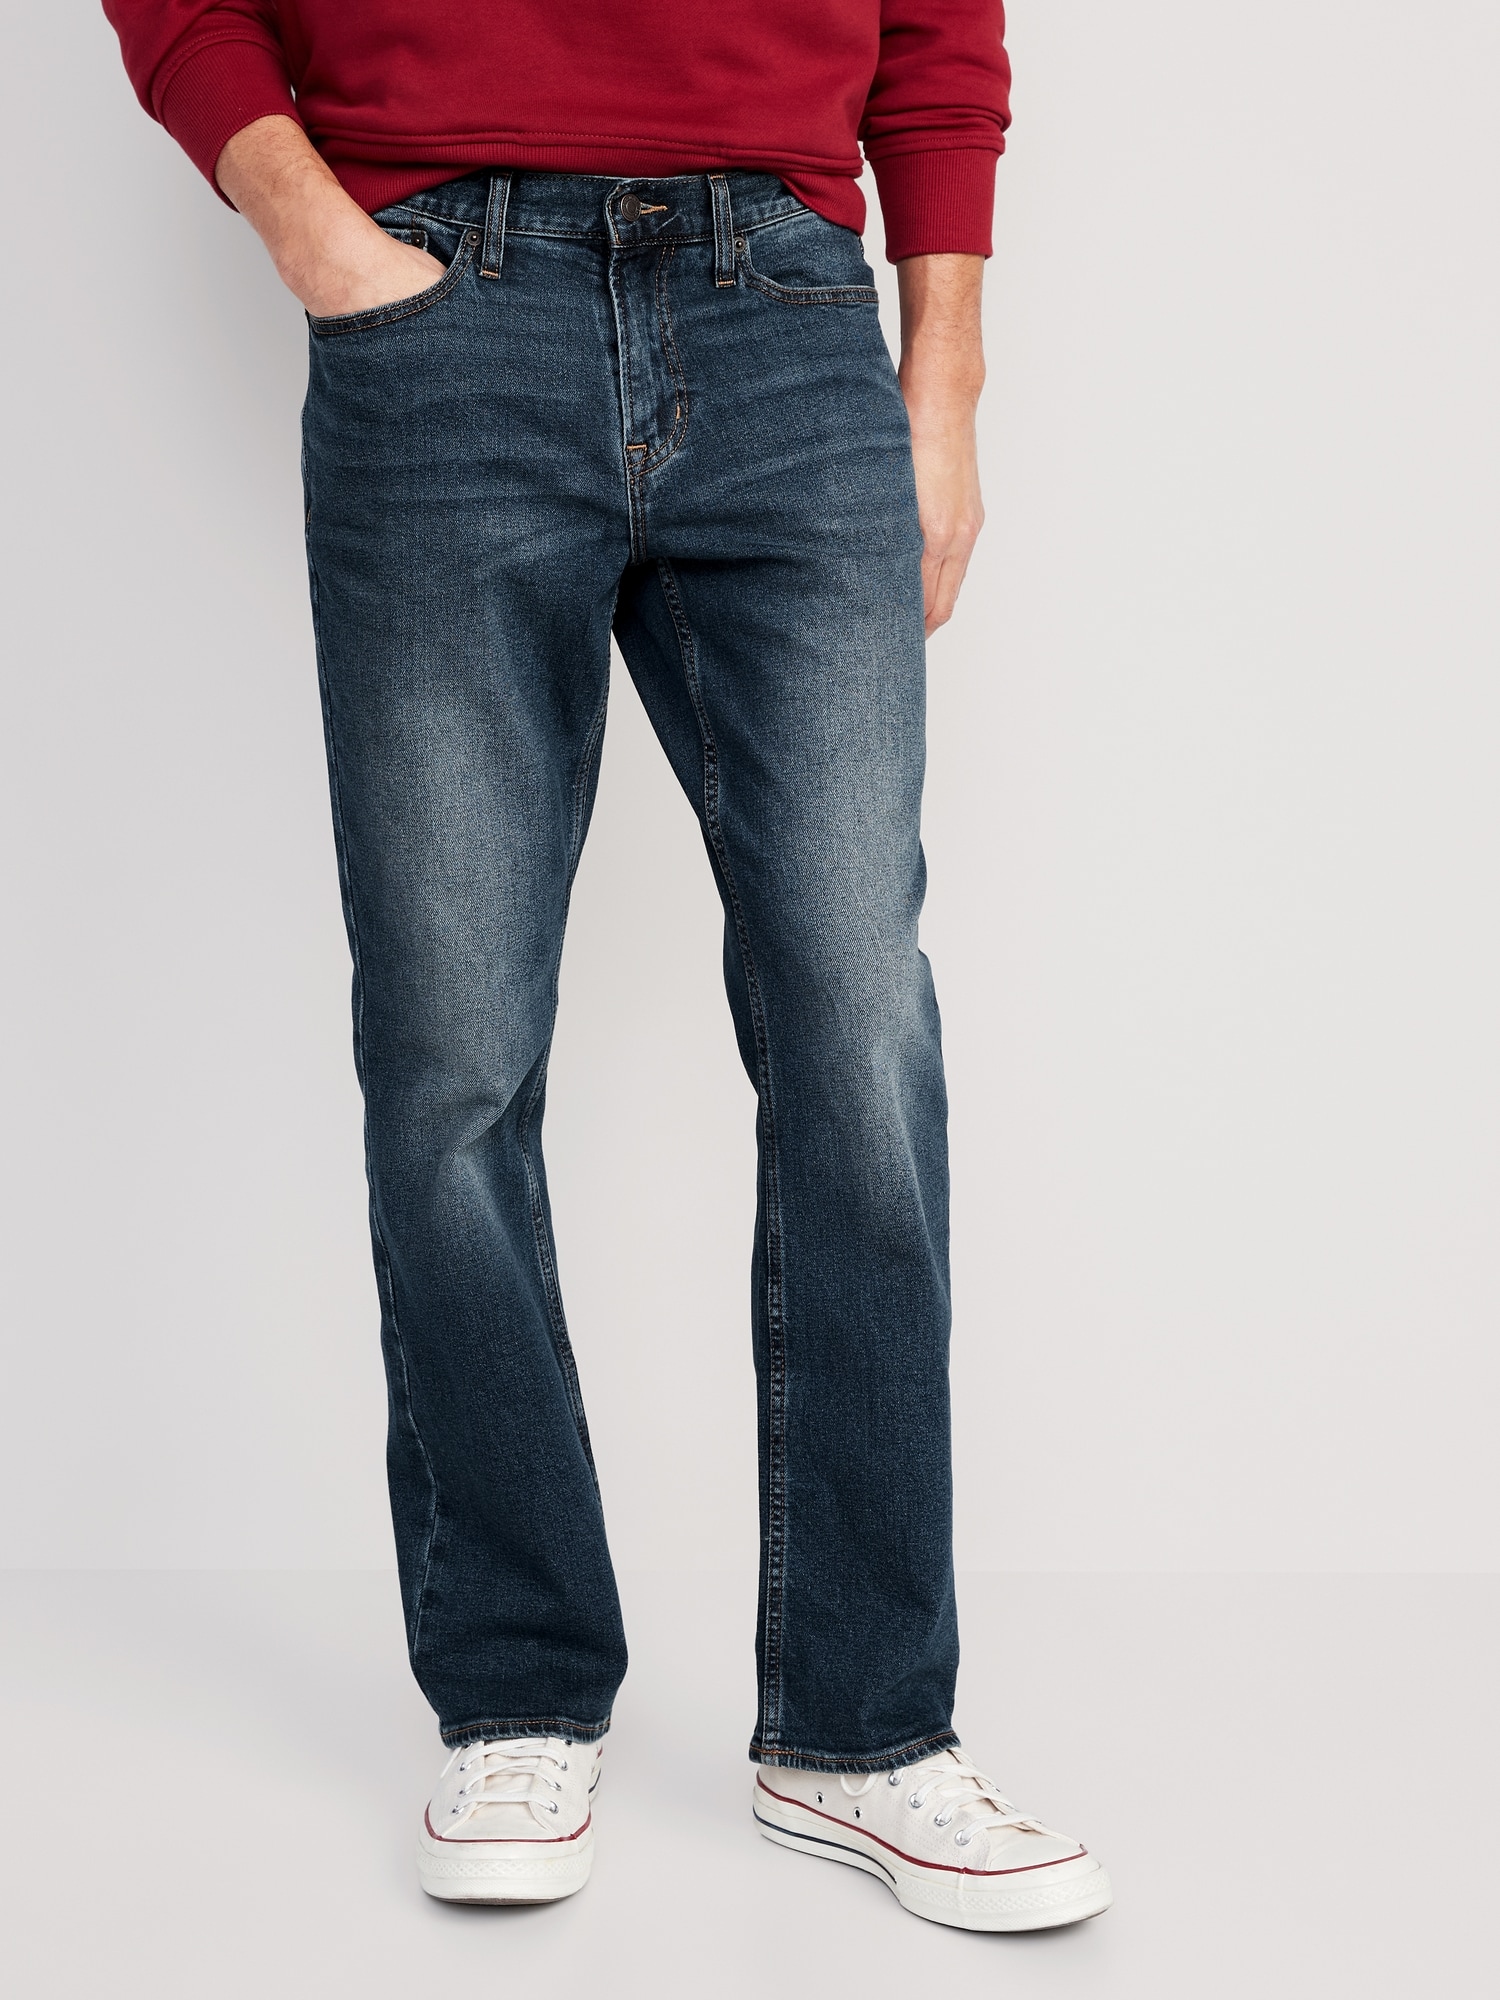 Bootcut jeans are back - Yahoo